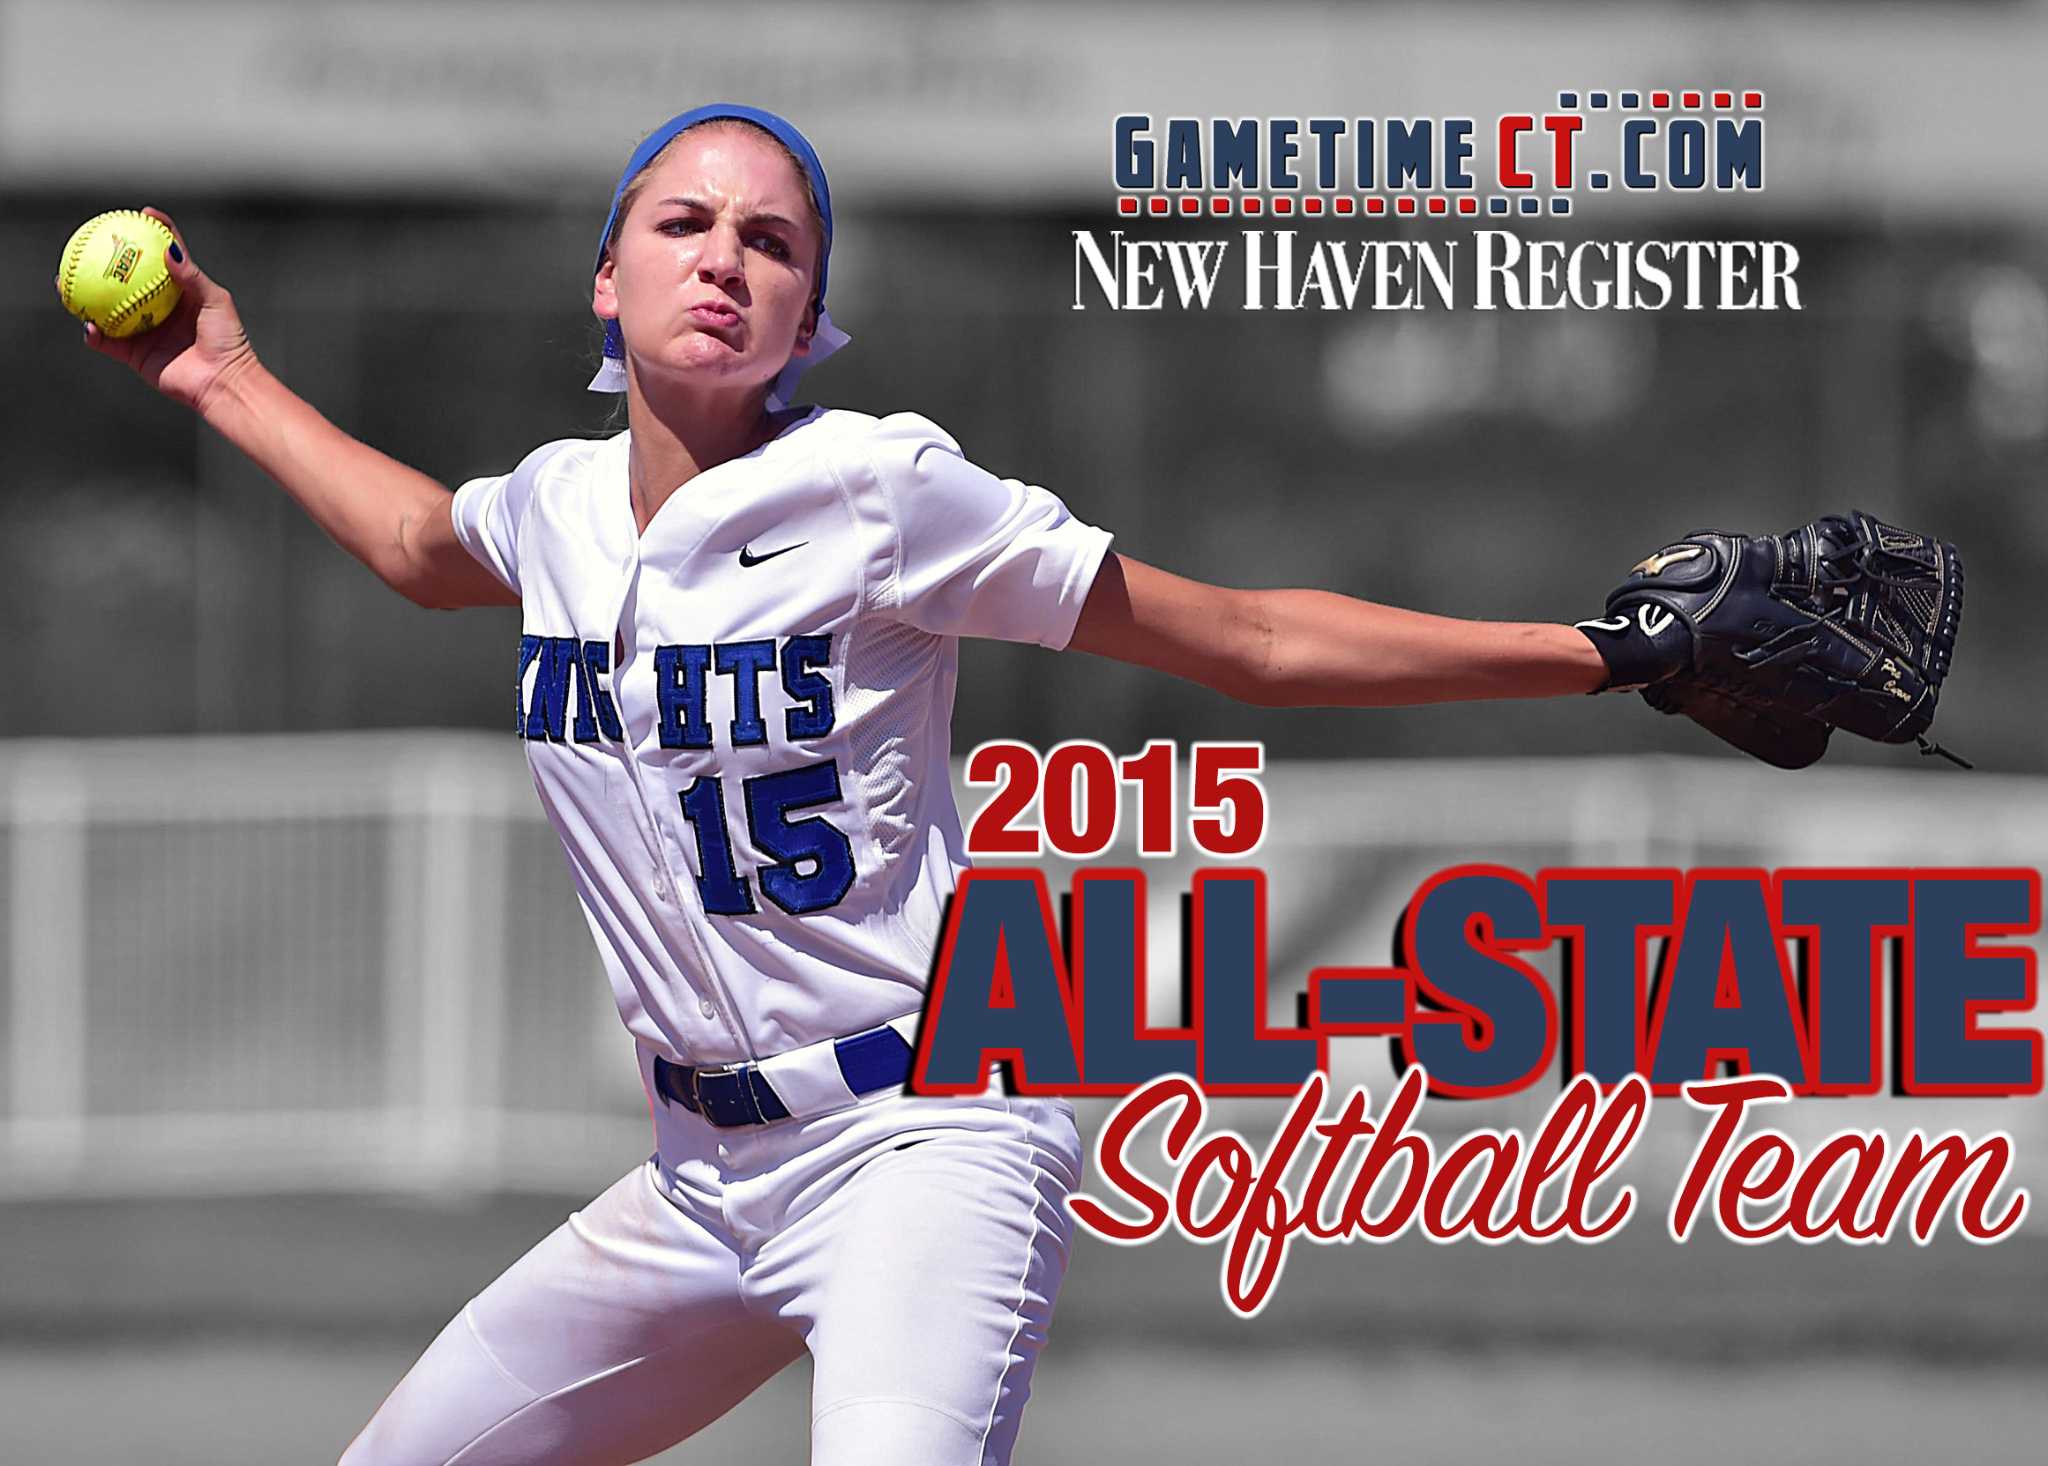 The 2015 New Haven Register / GameTime CT All-State Softball Team pic